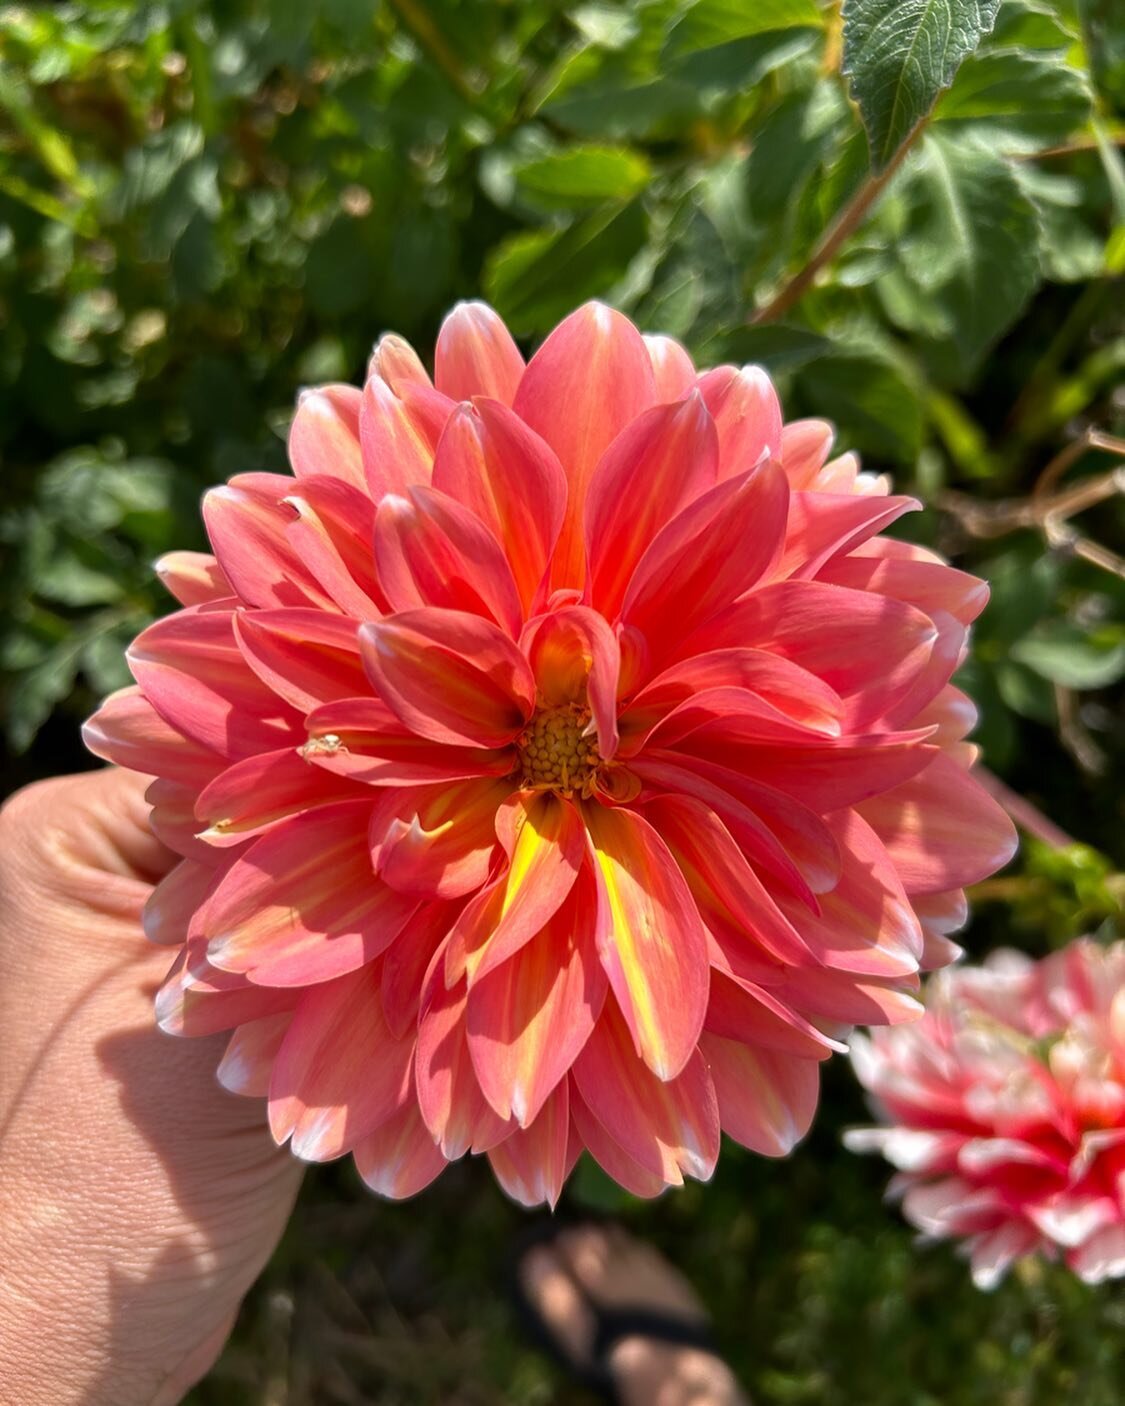 It's October and we still have dahlias! Come see for yourself! 

TODAY, 3-7: Grant Park. We have juicy tree fruit, crisp ripe apples, tasty treats, fire cider, candles, and more! more! more!

KERNEL today is all about GOURDS! From rattles, to bird ho